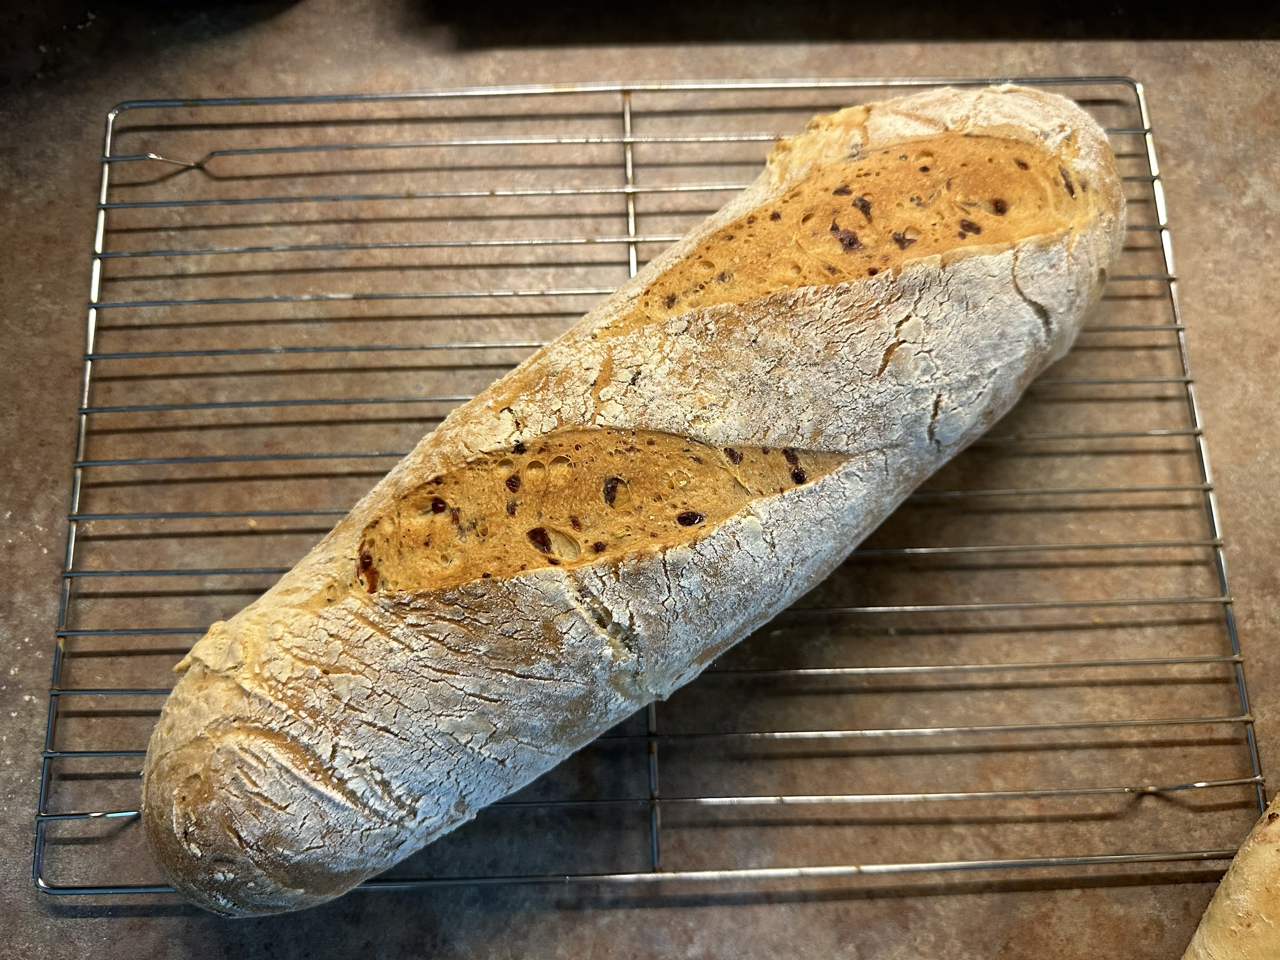 Photo shoot of tasty Italian herb bread.  Recipe by Chad Armstrong.